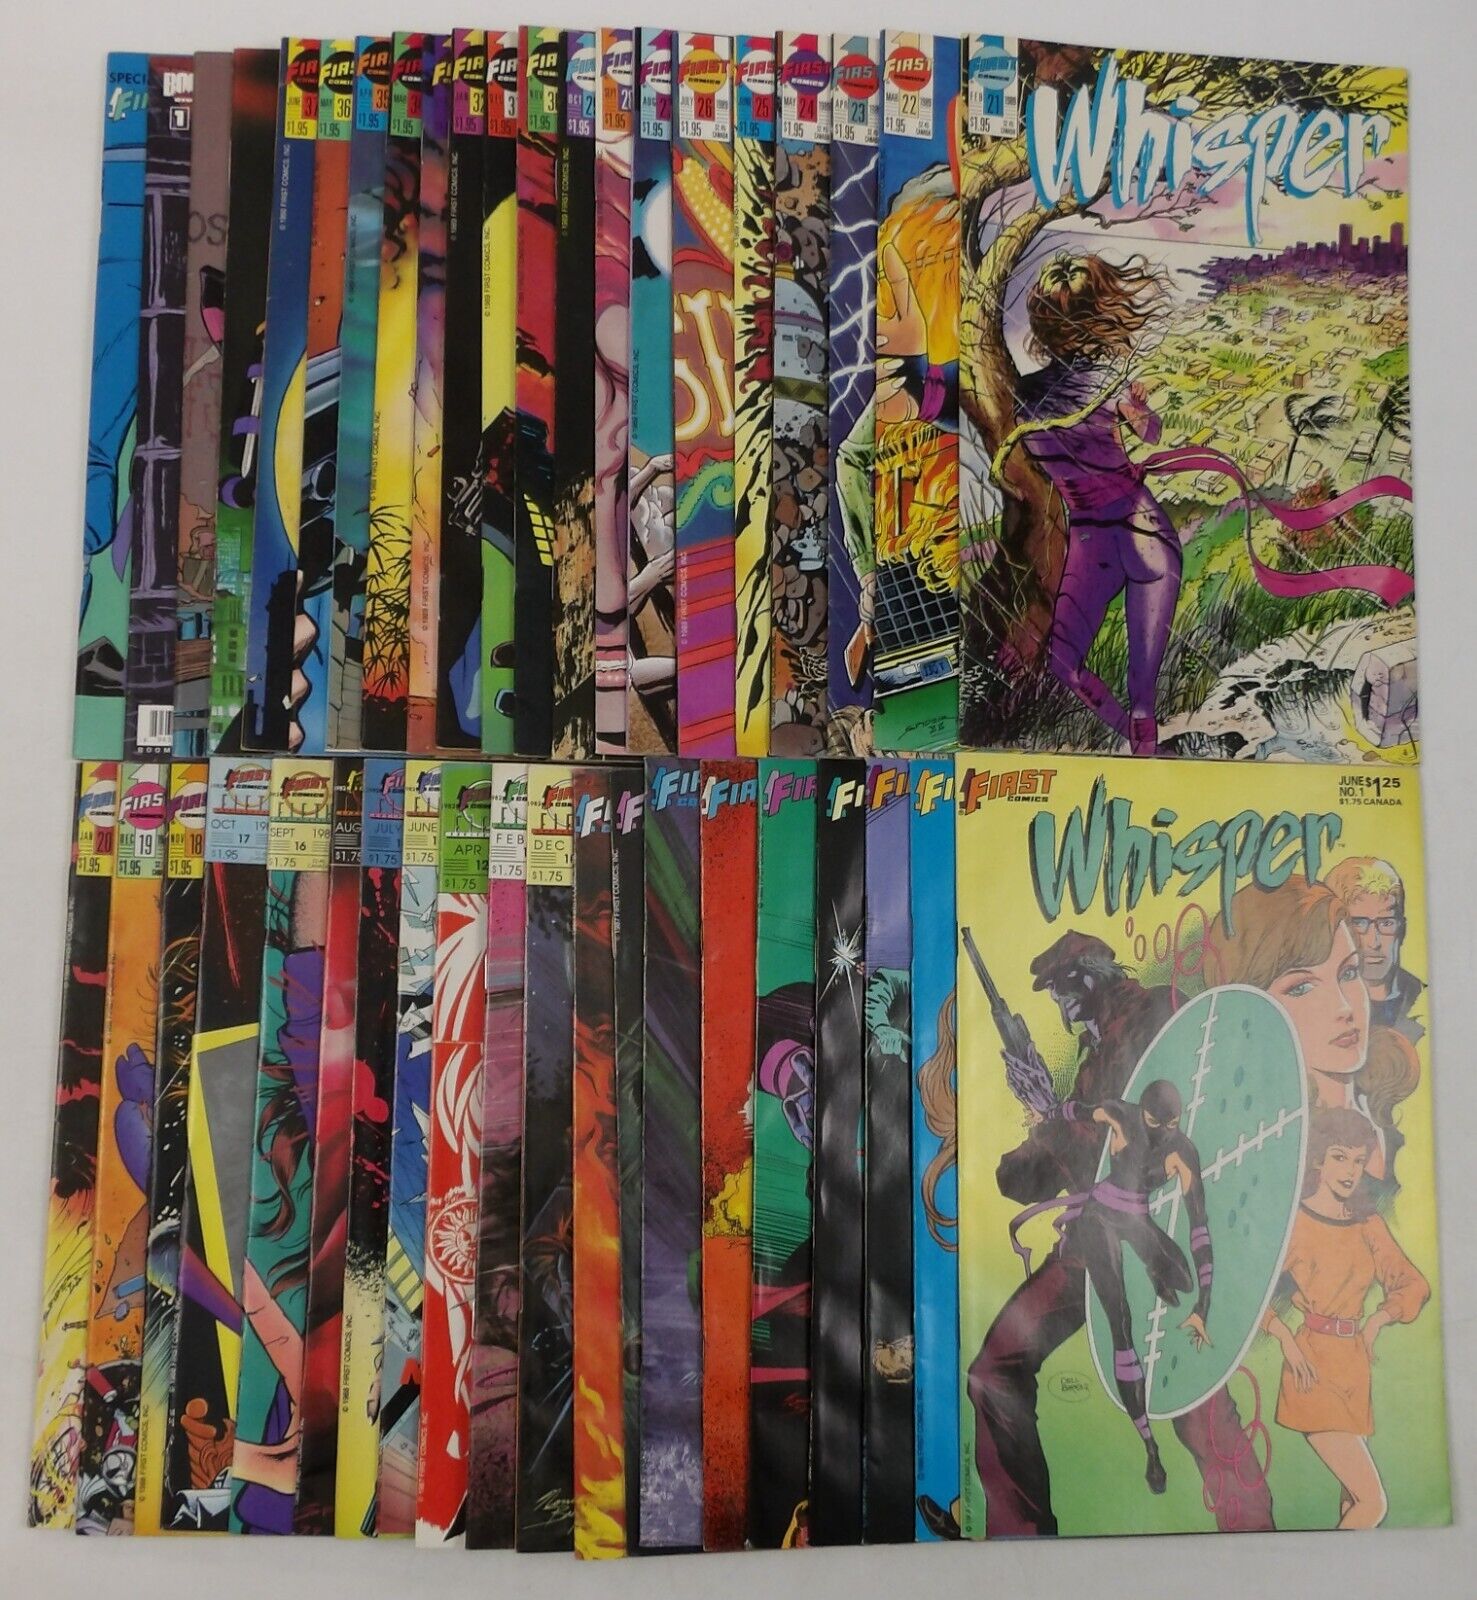 Whisper #1-2 complete series + Vol. 2 #1-37 + Vol. 3 #1 + Special - First Boom